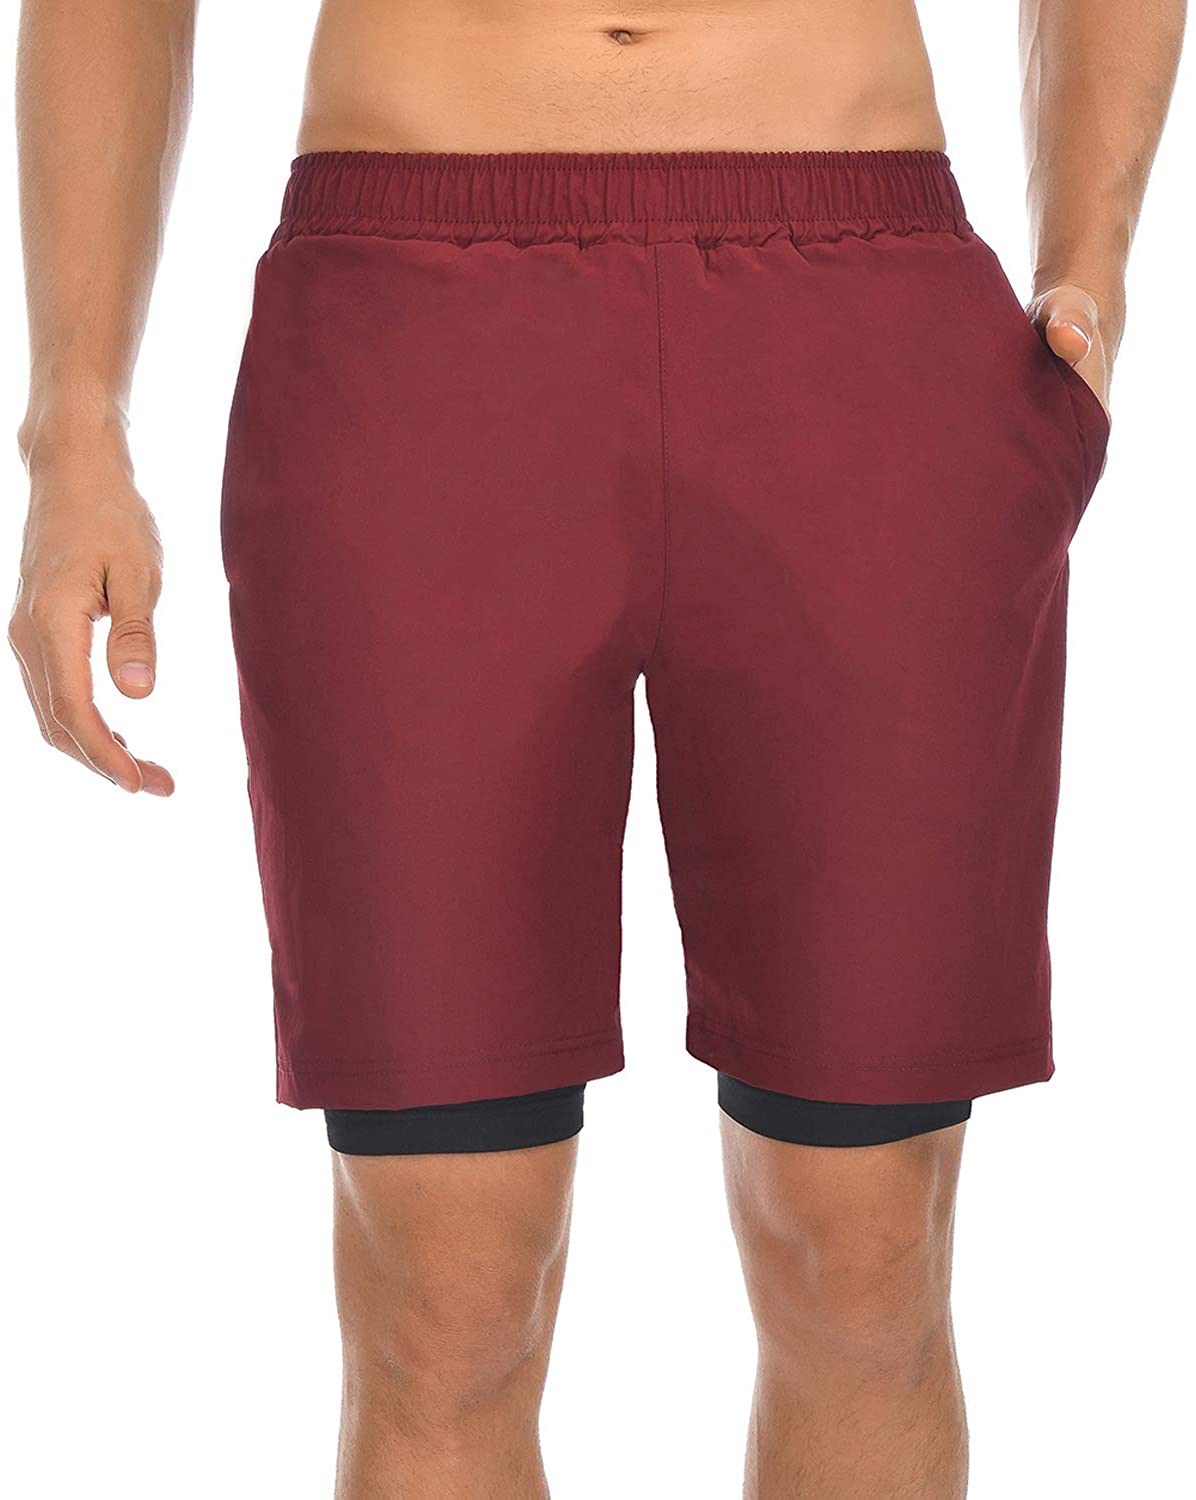 AITLGINVEN Mens 2-in-1 Running Shorts Sports Athletic Short with Zipper Pockets